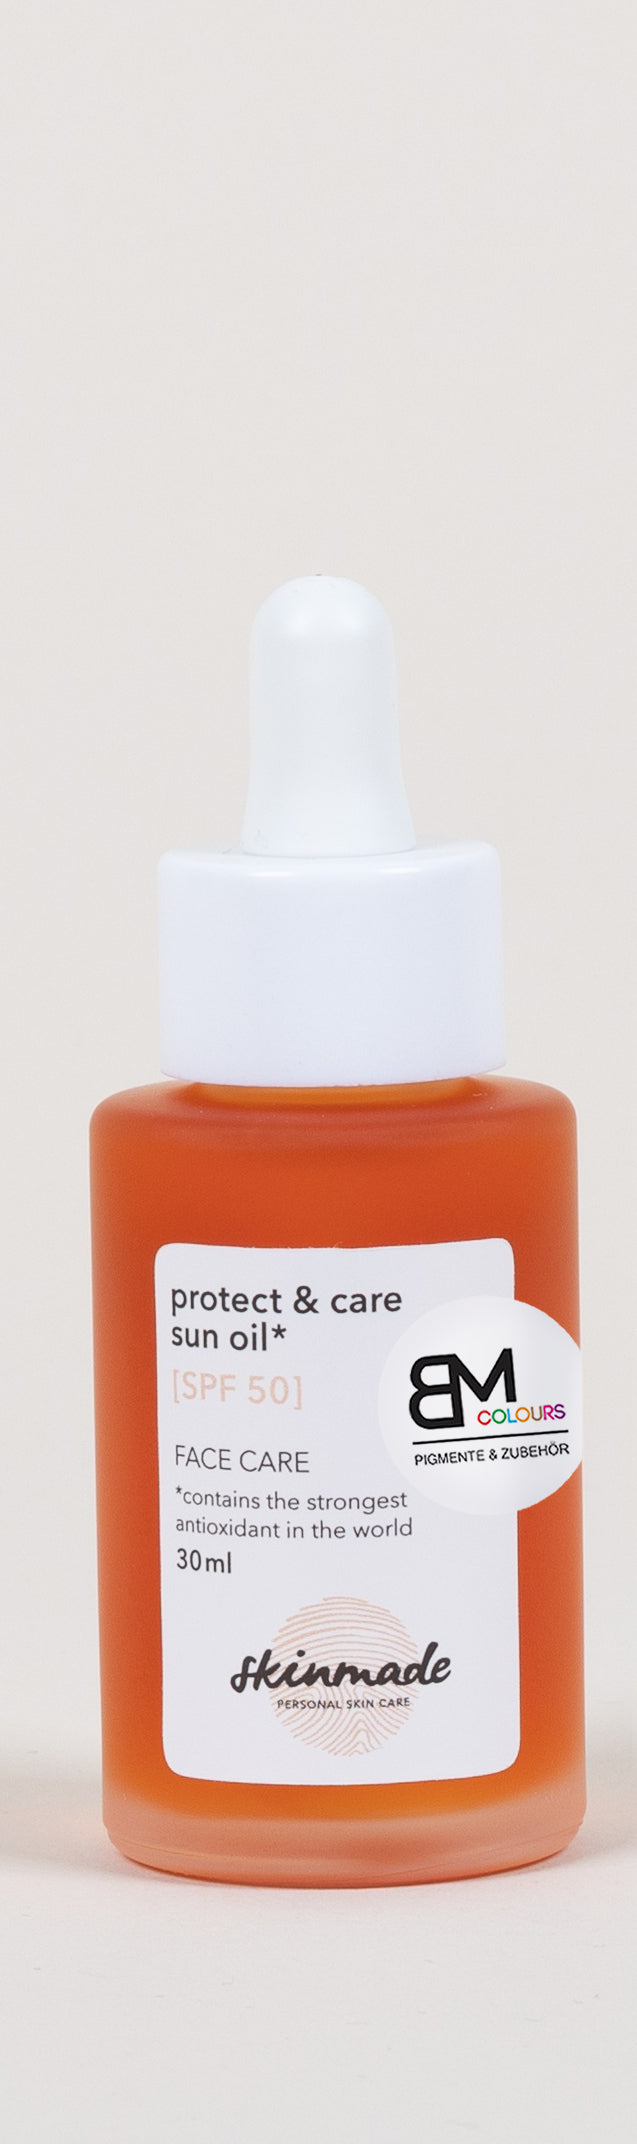 Sun oil SPF 50 - BM colors by Skinmade